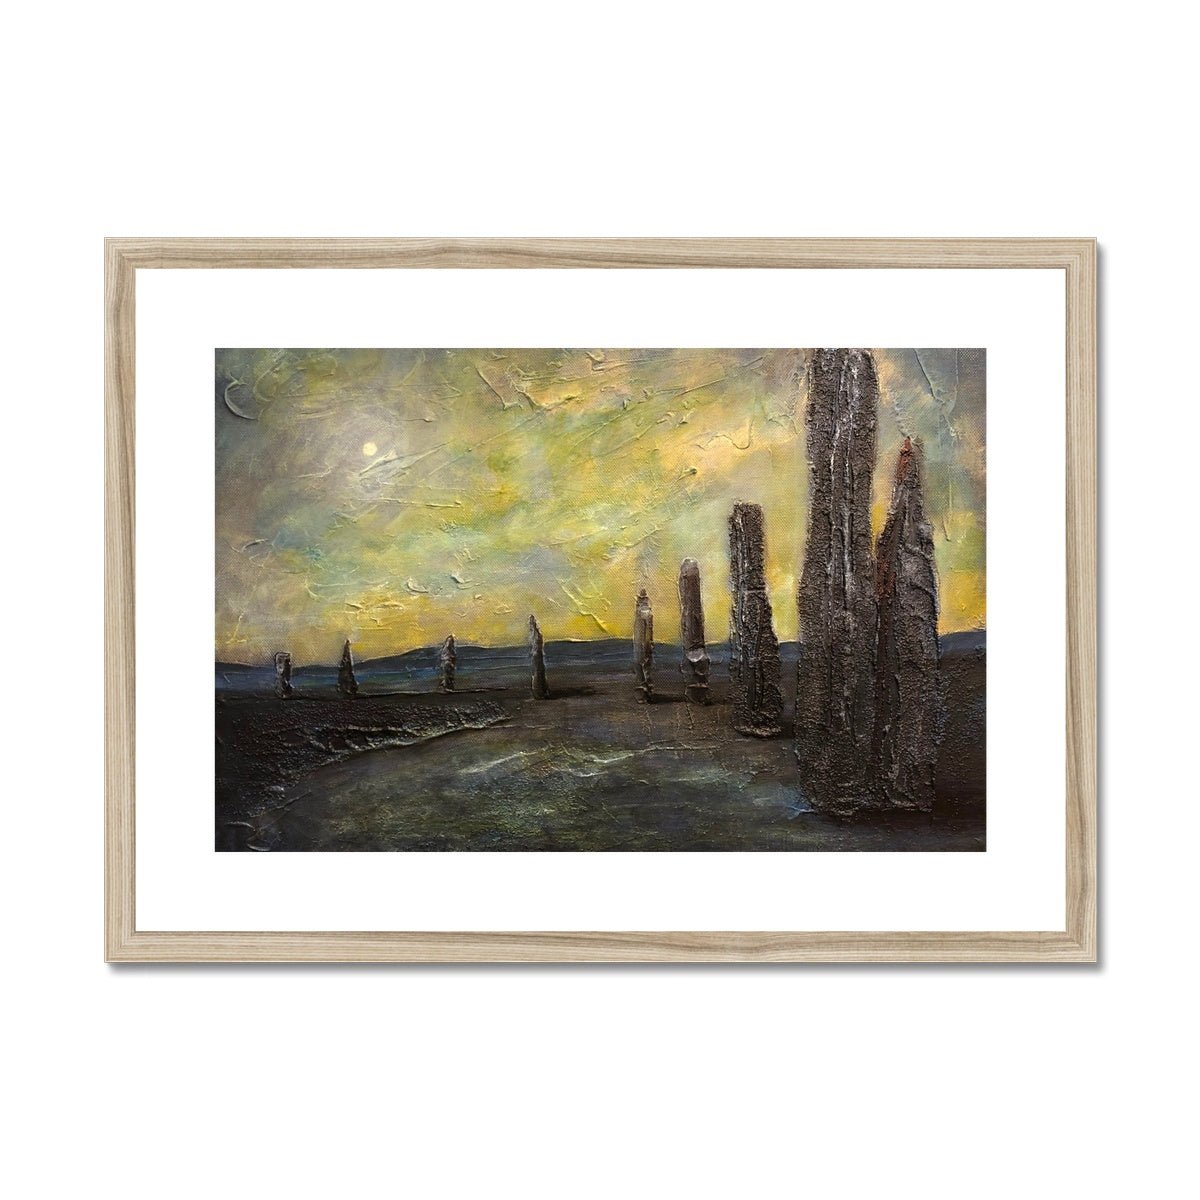 An Ethereal Ring Of Brodgar Orkney Painting | Framed & Mounted Prints From Scotland-Framed & Mounted Prints-Orkney Art Gallery-A2 Landscape-Natural Frame-Paintings, Prints, Homeware, Art Gifts From Scotland By Scottish Artist Kevin Hunter